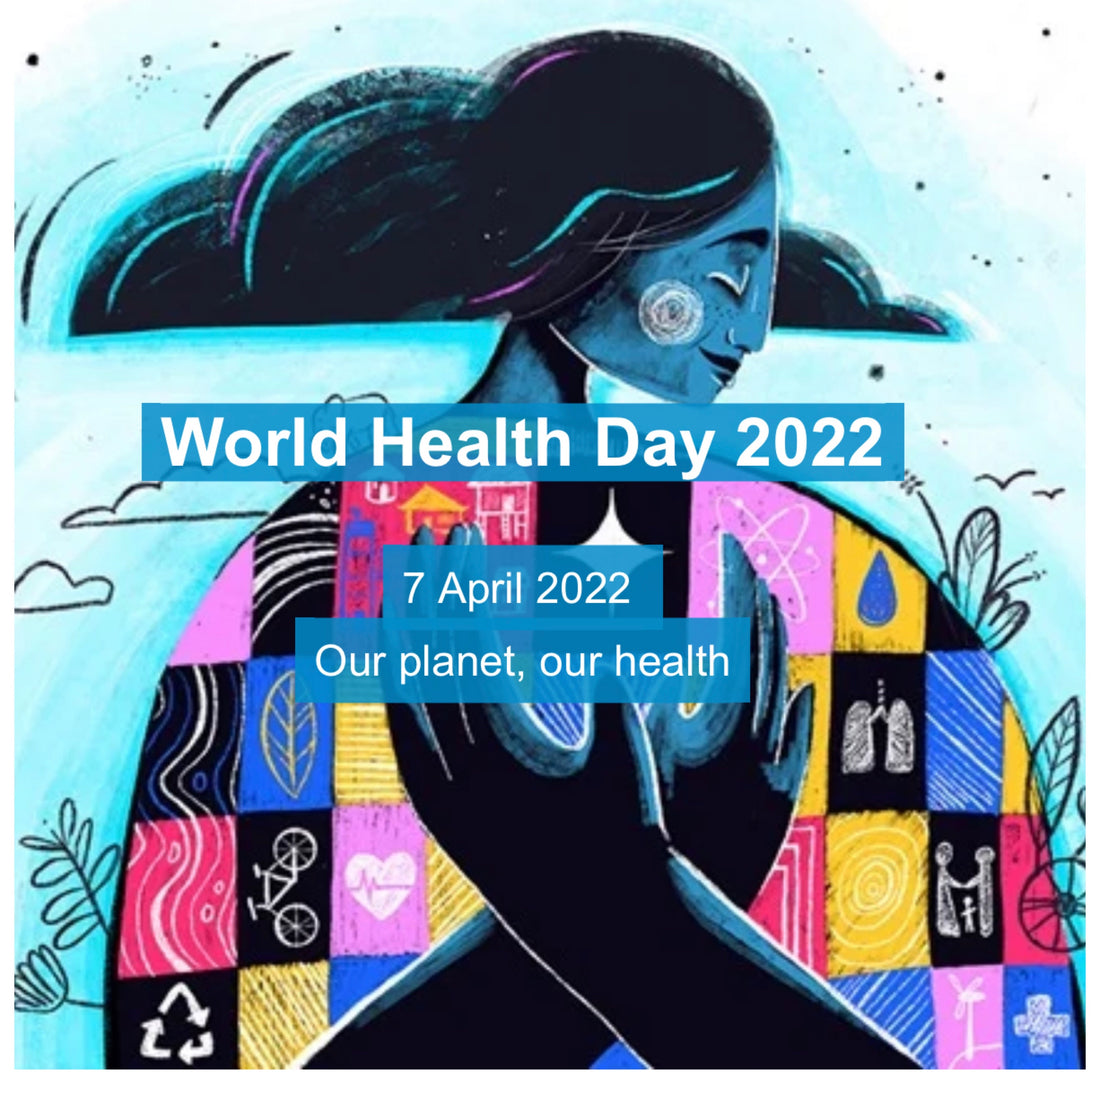 Our Planet Our Health on World Health Day. What’s your story?